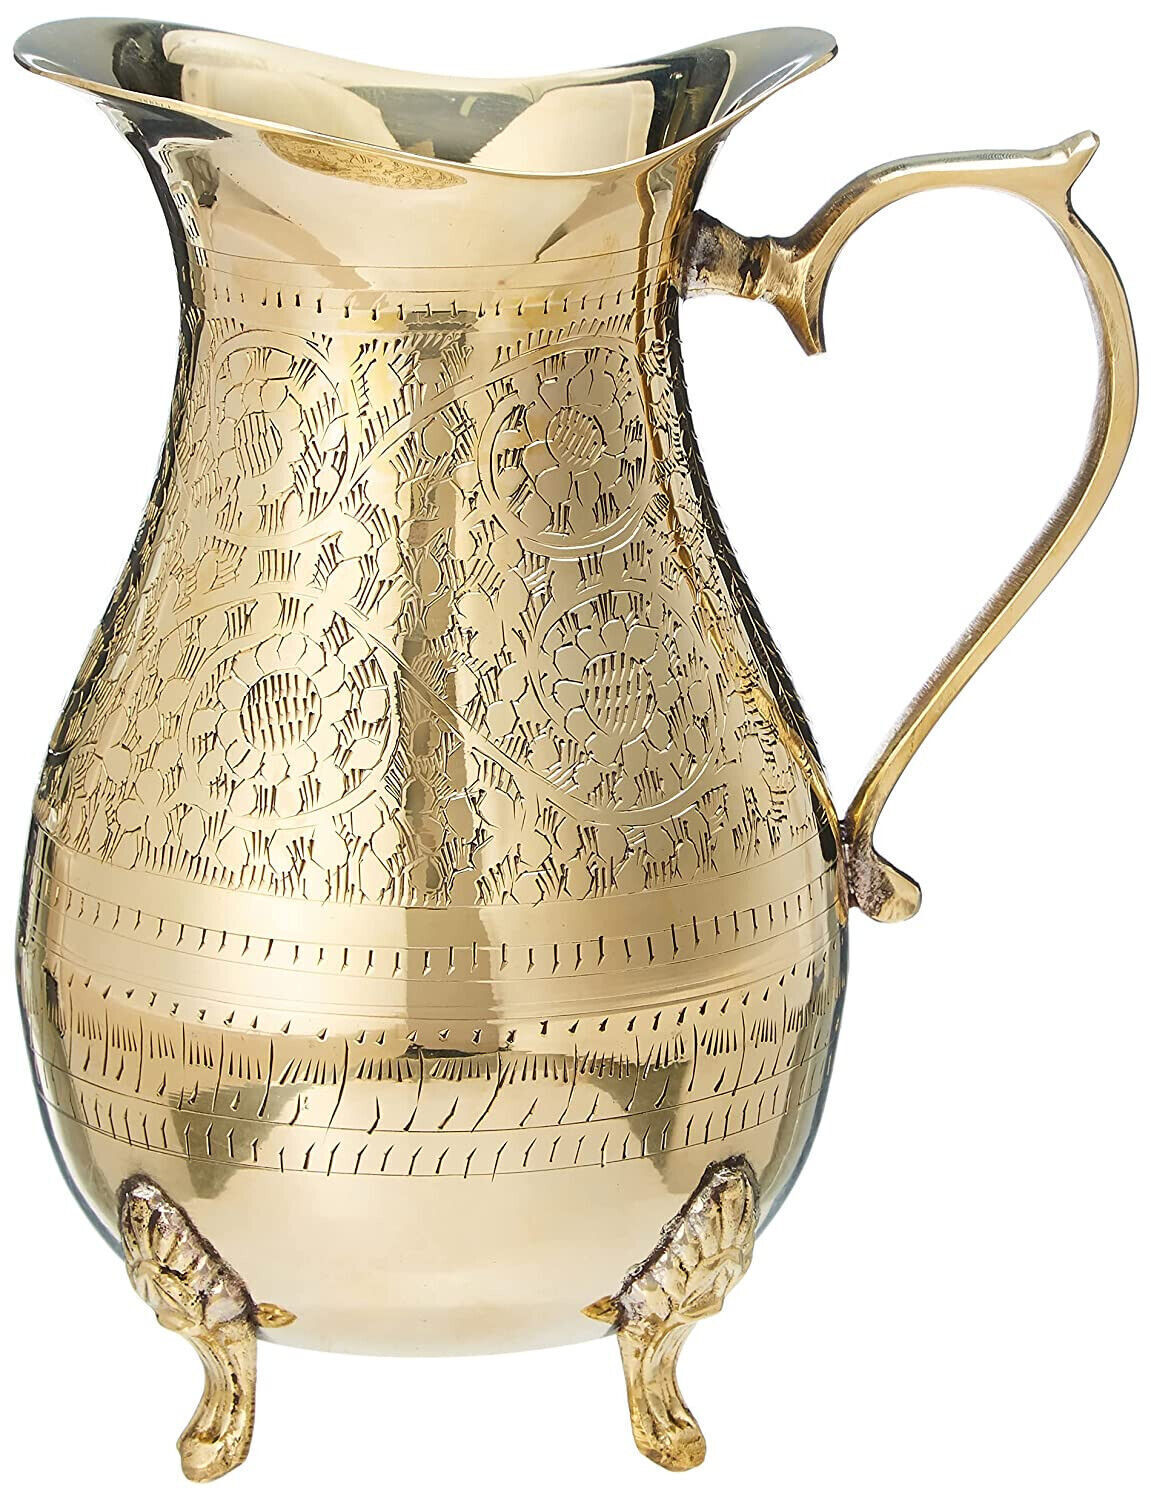 Indian Traditional Handmade Brass Jug With 4 Legs For Serving Drinking Water